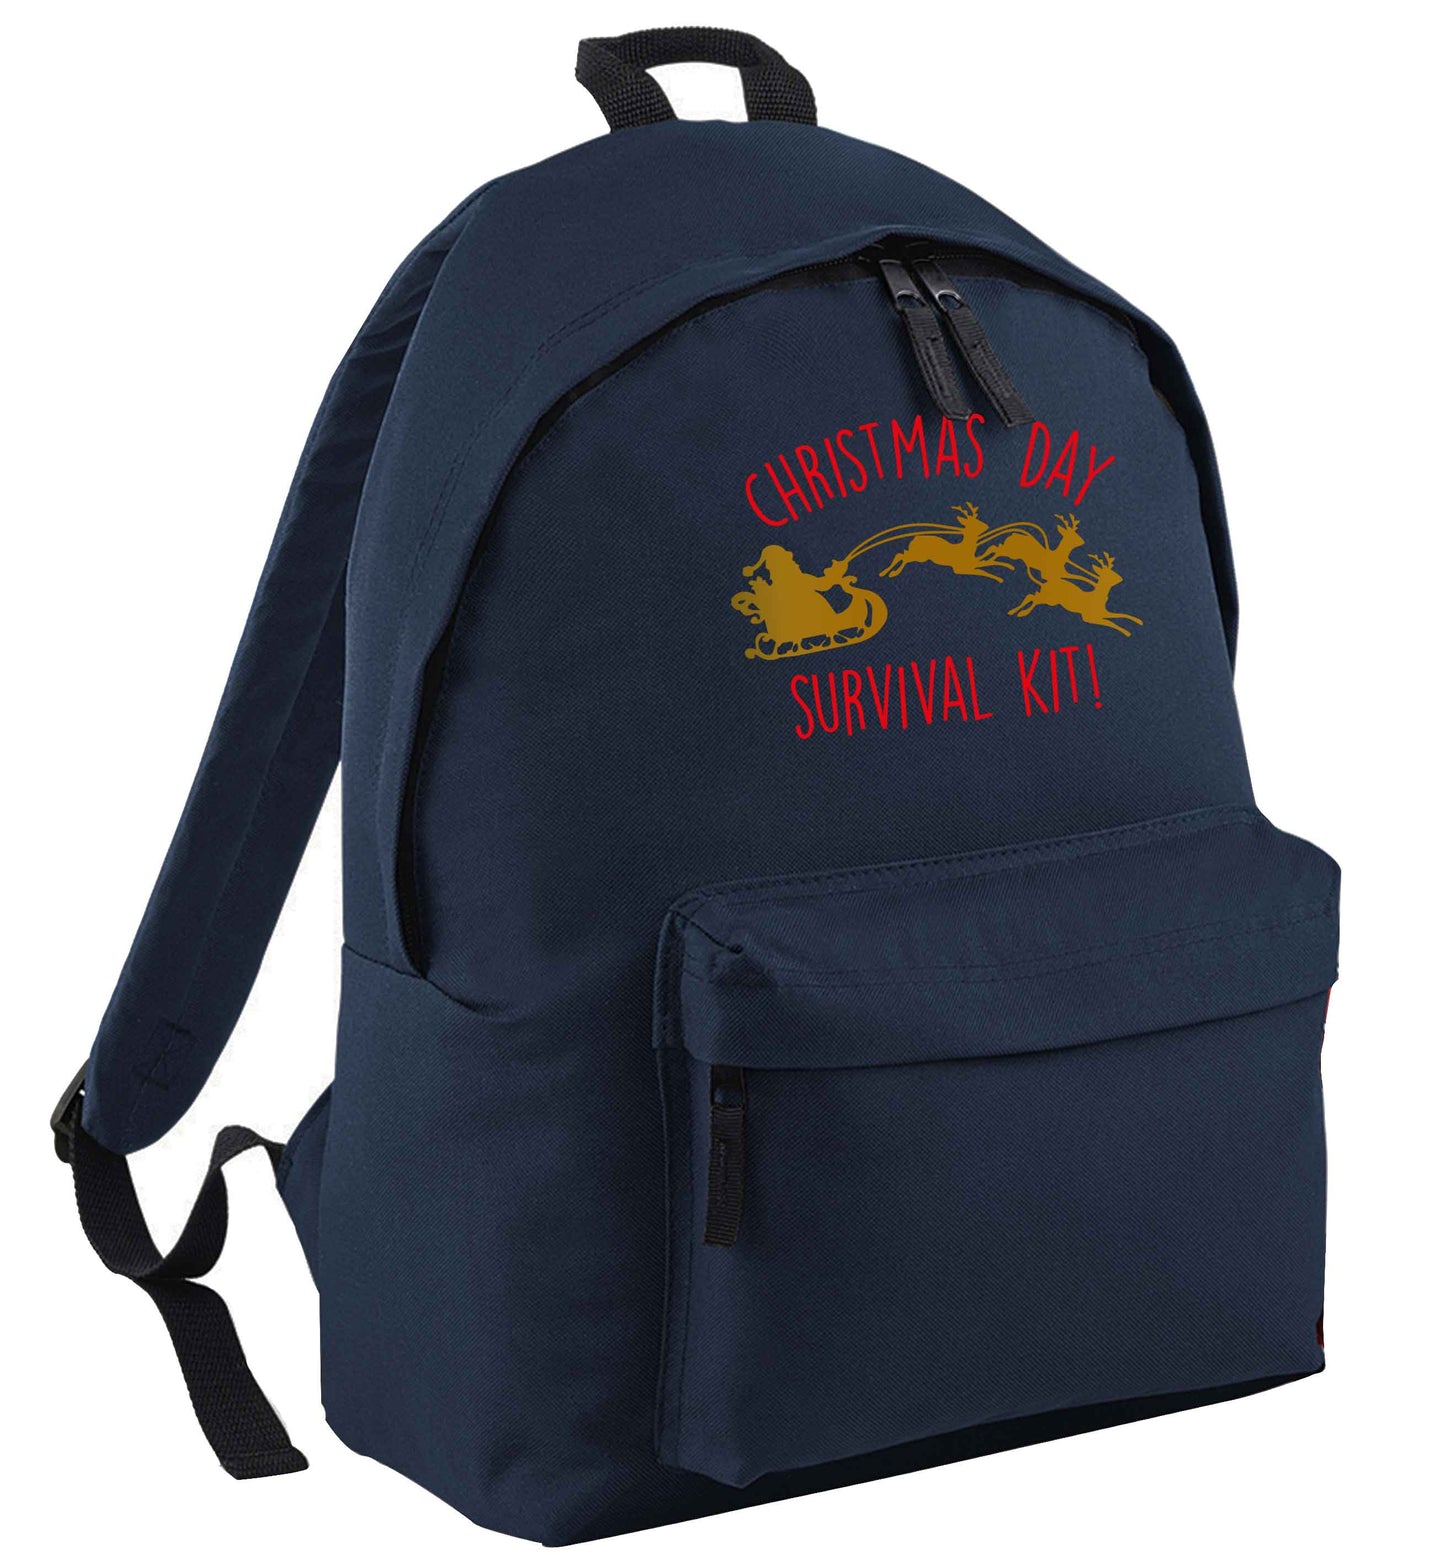 Christmas Day Survival Kitnavy adults backpack